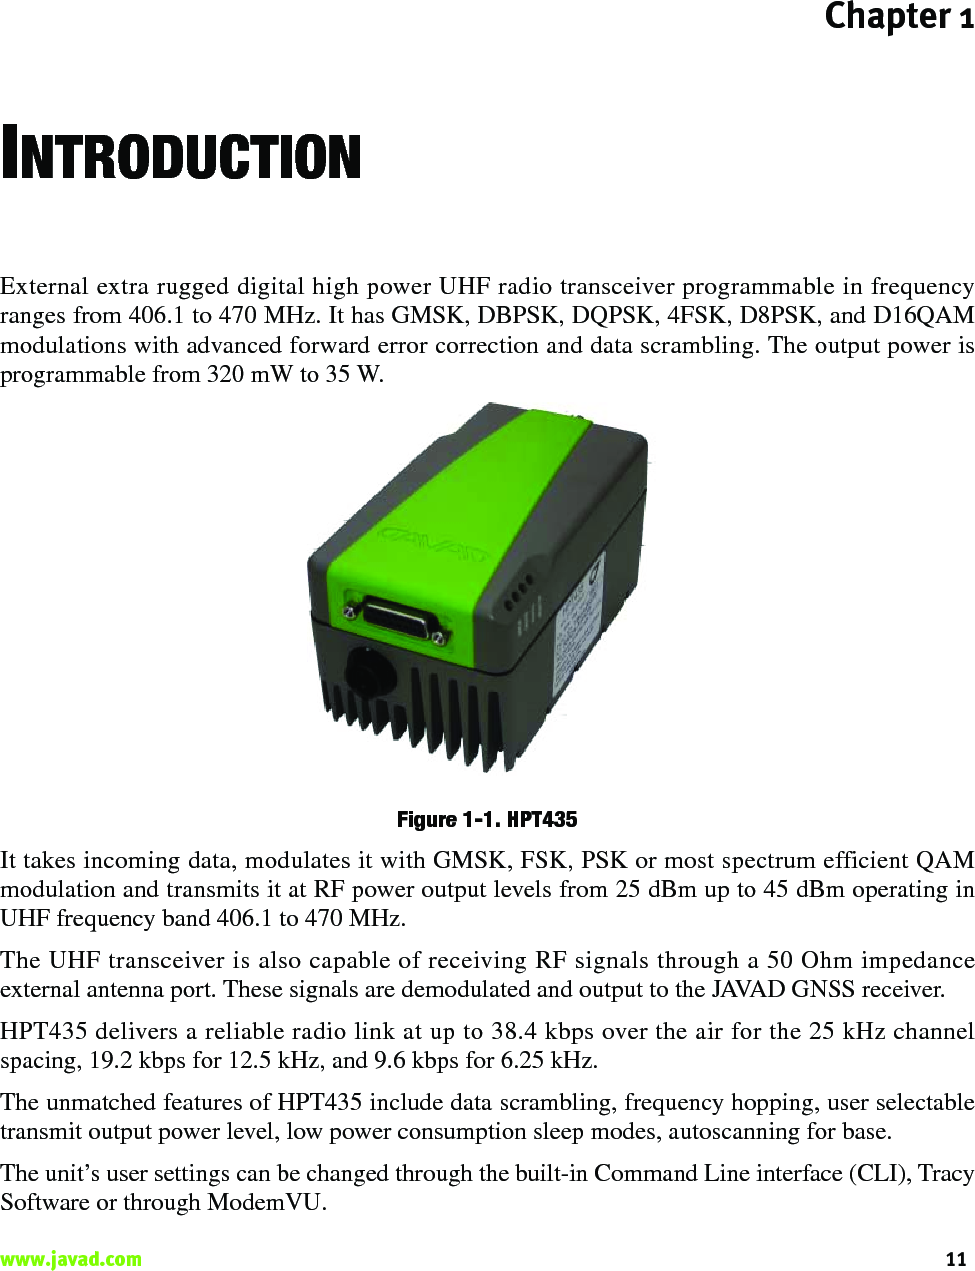 Chapter 111www.javad.com                                                                                                                                                    INTRODUCTIONExternal extra rugged digital high power UHF radio transceiver programmable in frequencyranges from 406.1 to 470 MHz. It has GMSK, DBPSK, DQPSK, 4FSK, D8PSK, and D16QAMmodulations with advanced forward error correction and data scrambling. The output power isprogrammable from 320 mW to 35 W. Figure 1-1. HPT435It takes incoming data, modulates it with GMSK, FSK, PSK or most spectrum efficient QAMmodulation and transmits it at RF power output levels from 25 dBm up to 45 dBm operating inUHF frequency band 406.1 to 470 MHz.The UHF transceiver is also capable of receiving RF signals through a 50 Ohm impedanceexternal antenna port. These signals are demodulated and output to the JAVAD GNSS receiver. HPT435 delivers a reliable radio link at up to 38.4 kbps over the air for the 25 kHz channelspacing, 19.2 kbps for 12.5 kHz, and 9.6 kbps for 6.25 kHz.The unmatched features of HPT435 include data scrambling, frequency hopping, user selectabletransmit output power level, low power consumption sleep modes, autoscanning for base.The unit’s user settings can be changed through the built-in Command Line interface (CLI), TracySoftware or through ModemVU.